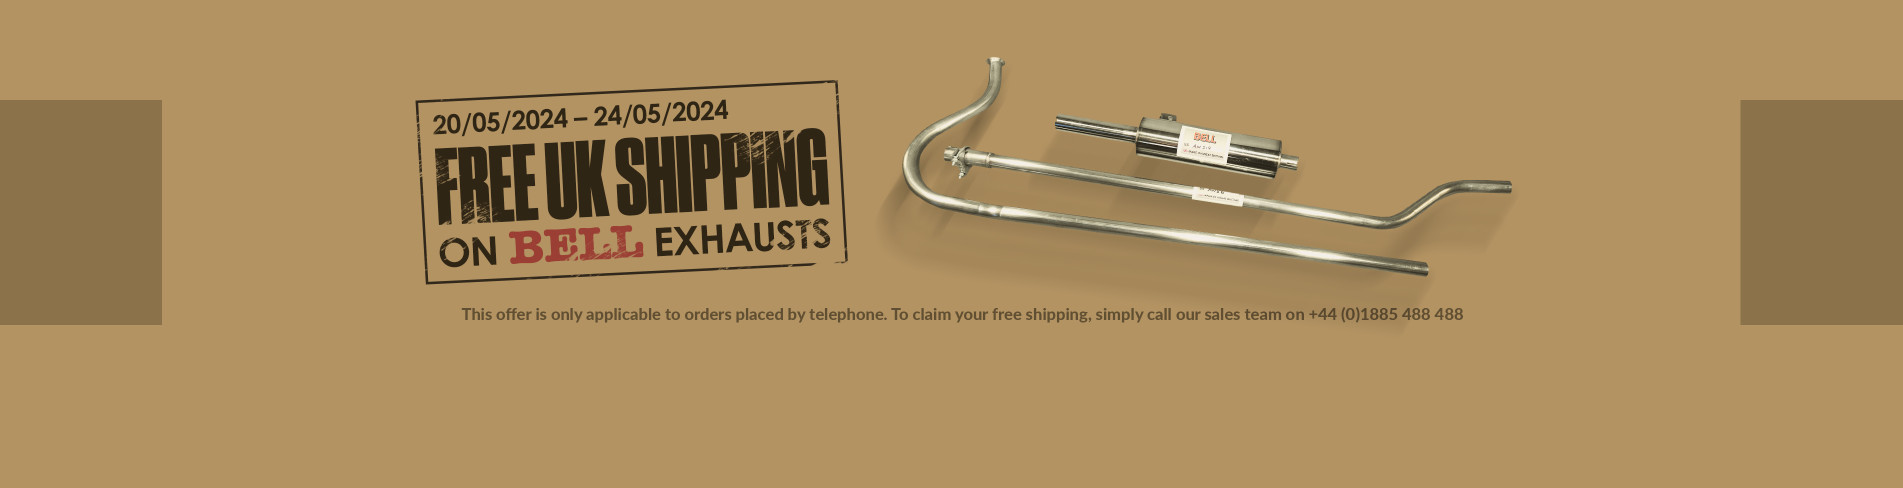 Free UK Shipping on Bell Exhausts